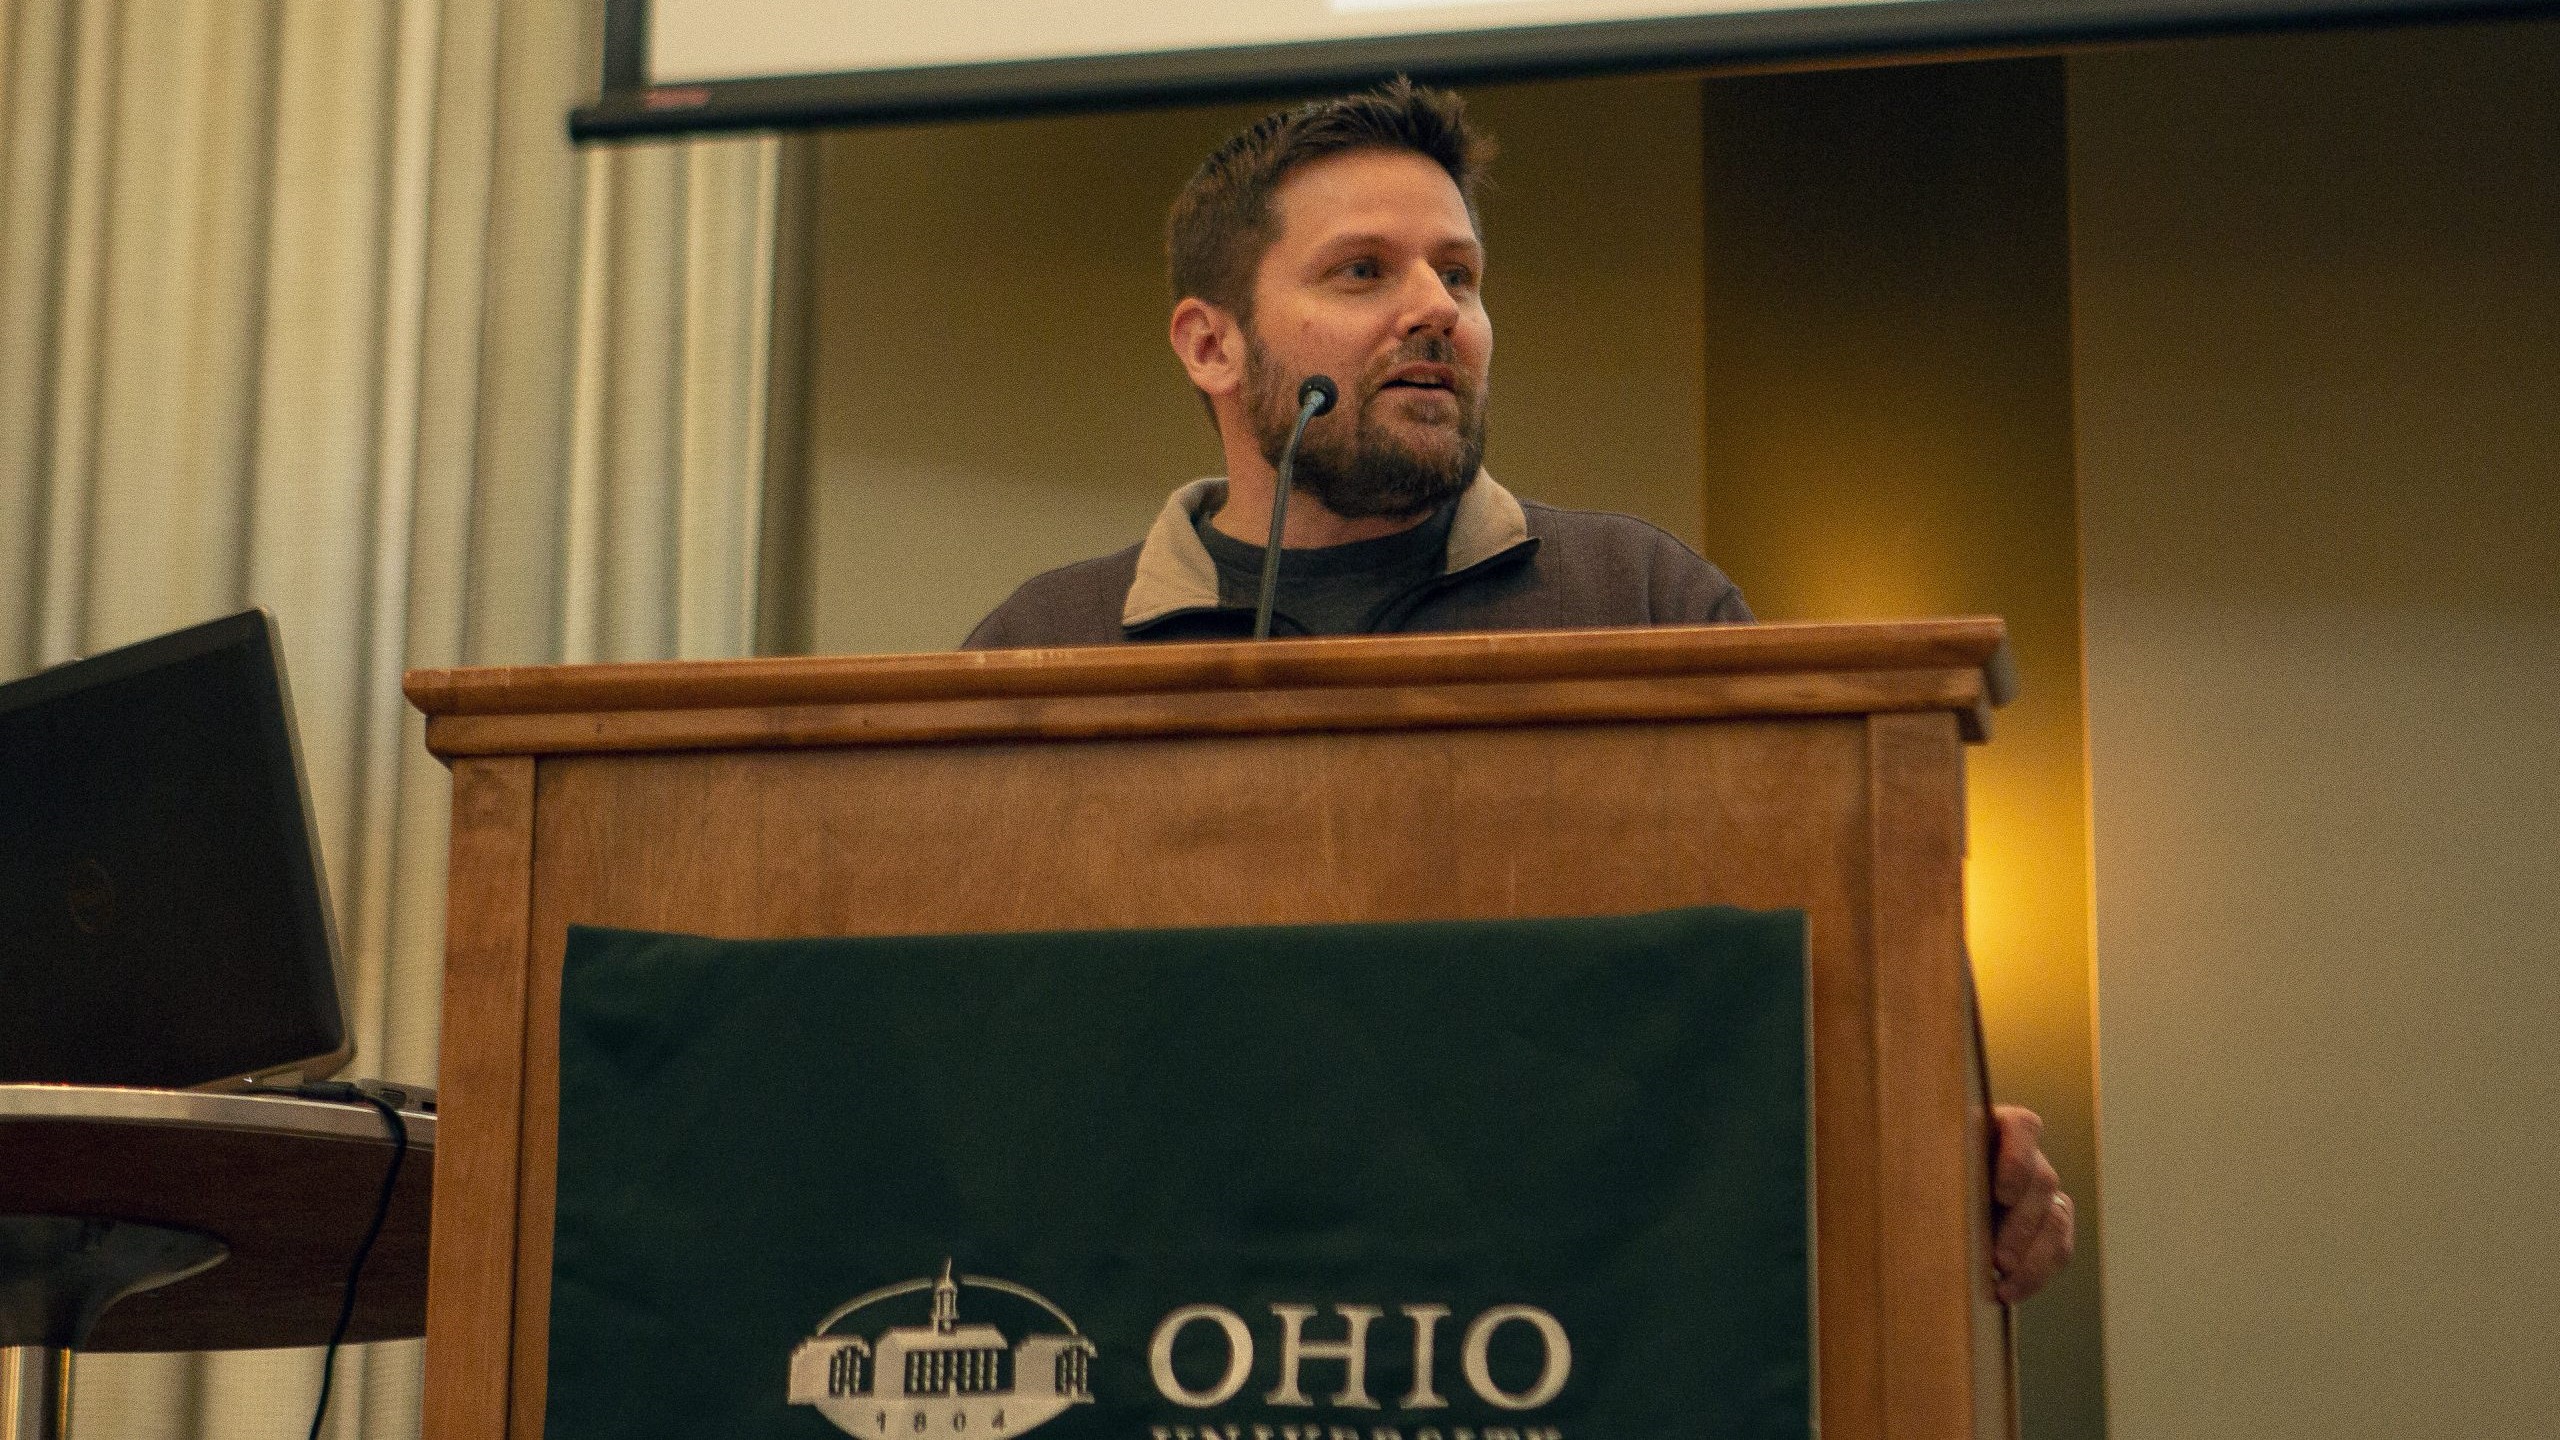 Dr. Jeremy Rinker Presents on “Religion and Peace: Global Perspectives and Possibilities” in Ohio